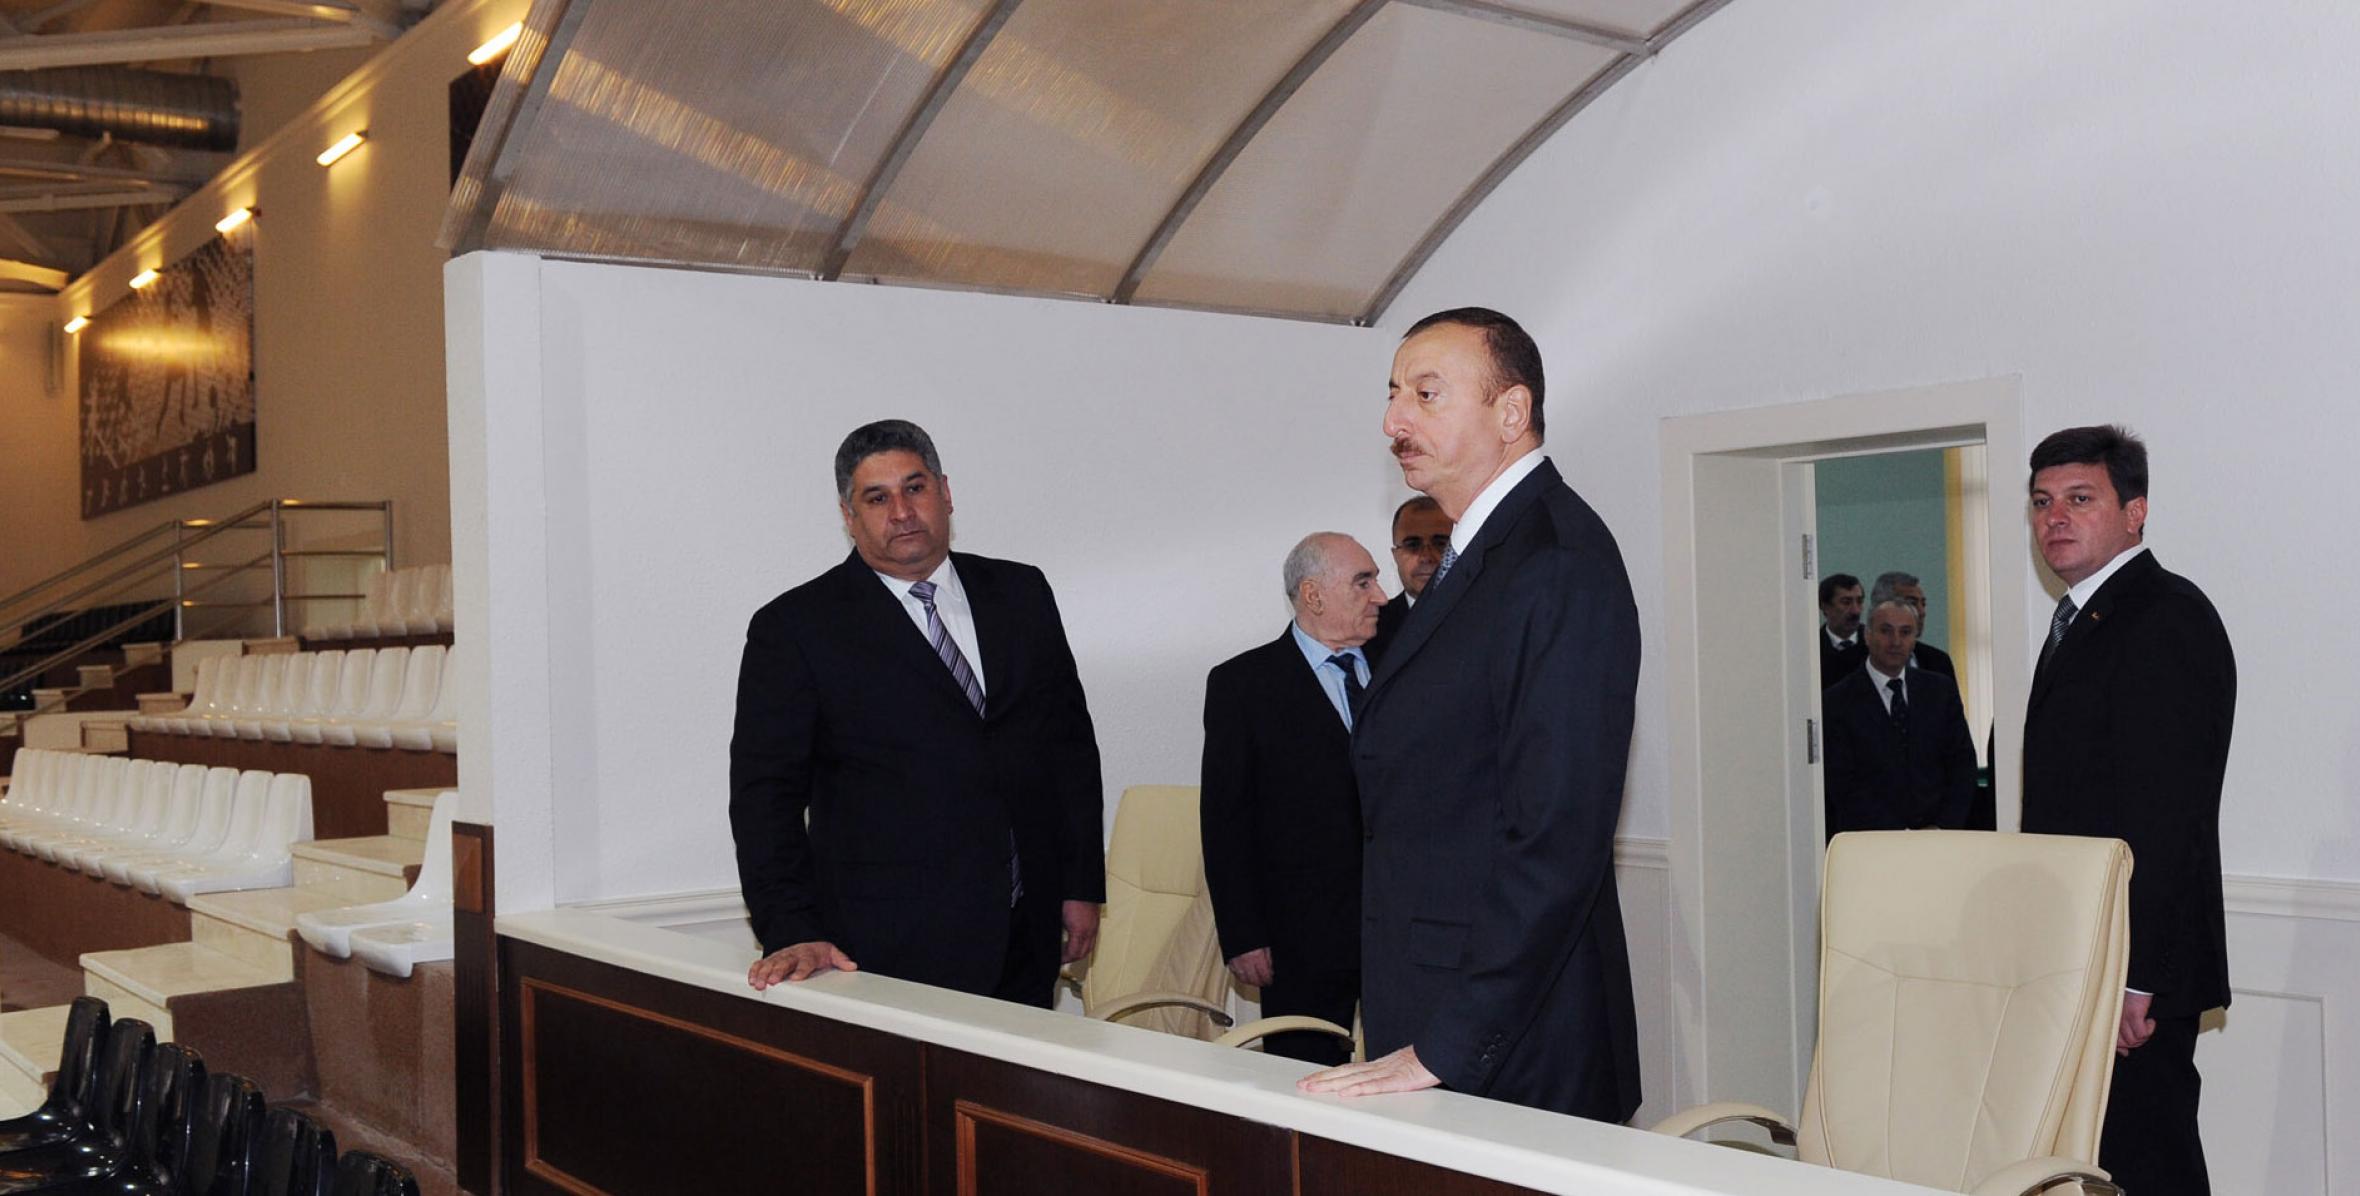 Ilham Aliyev attended the opening of the Gabala Olympic Sports Center